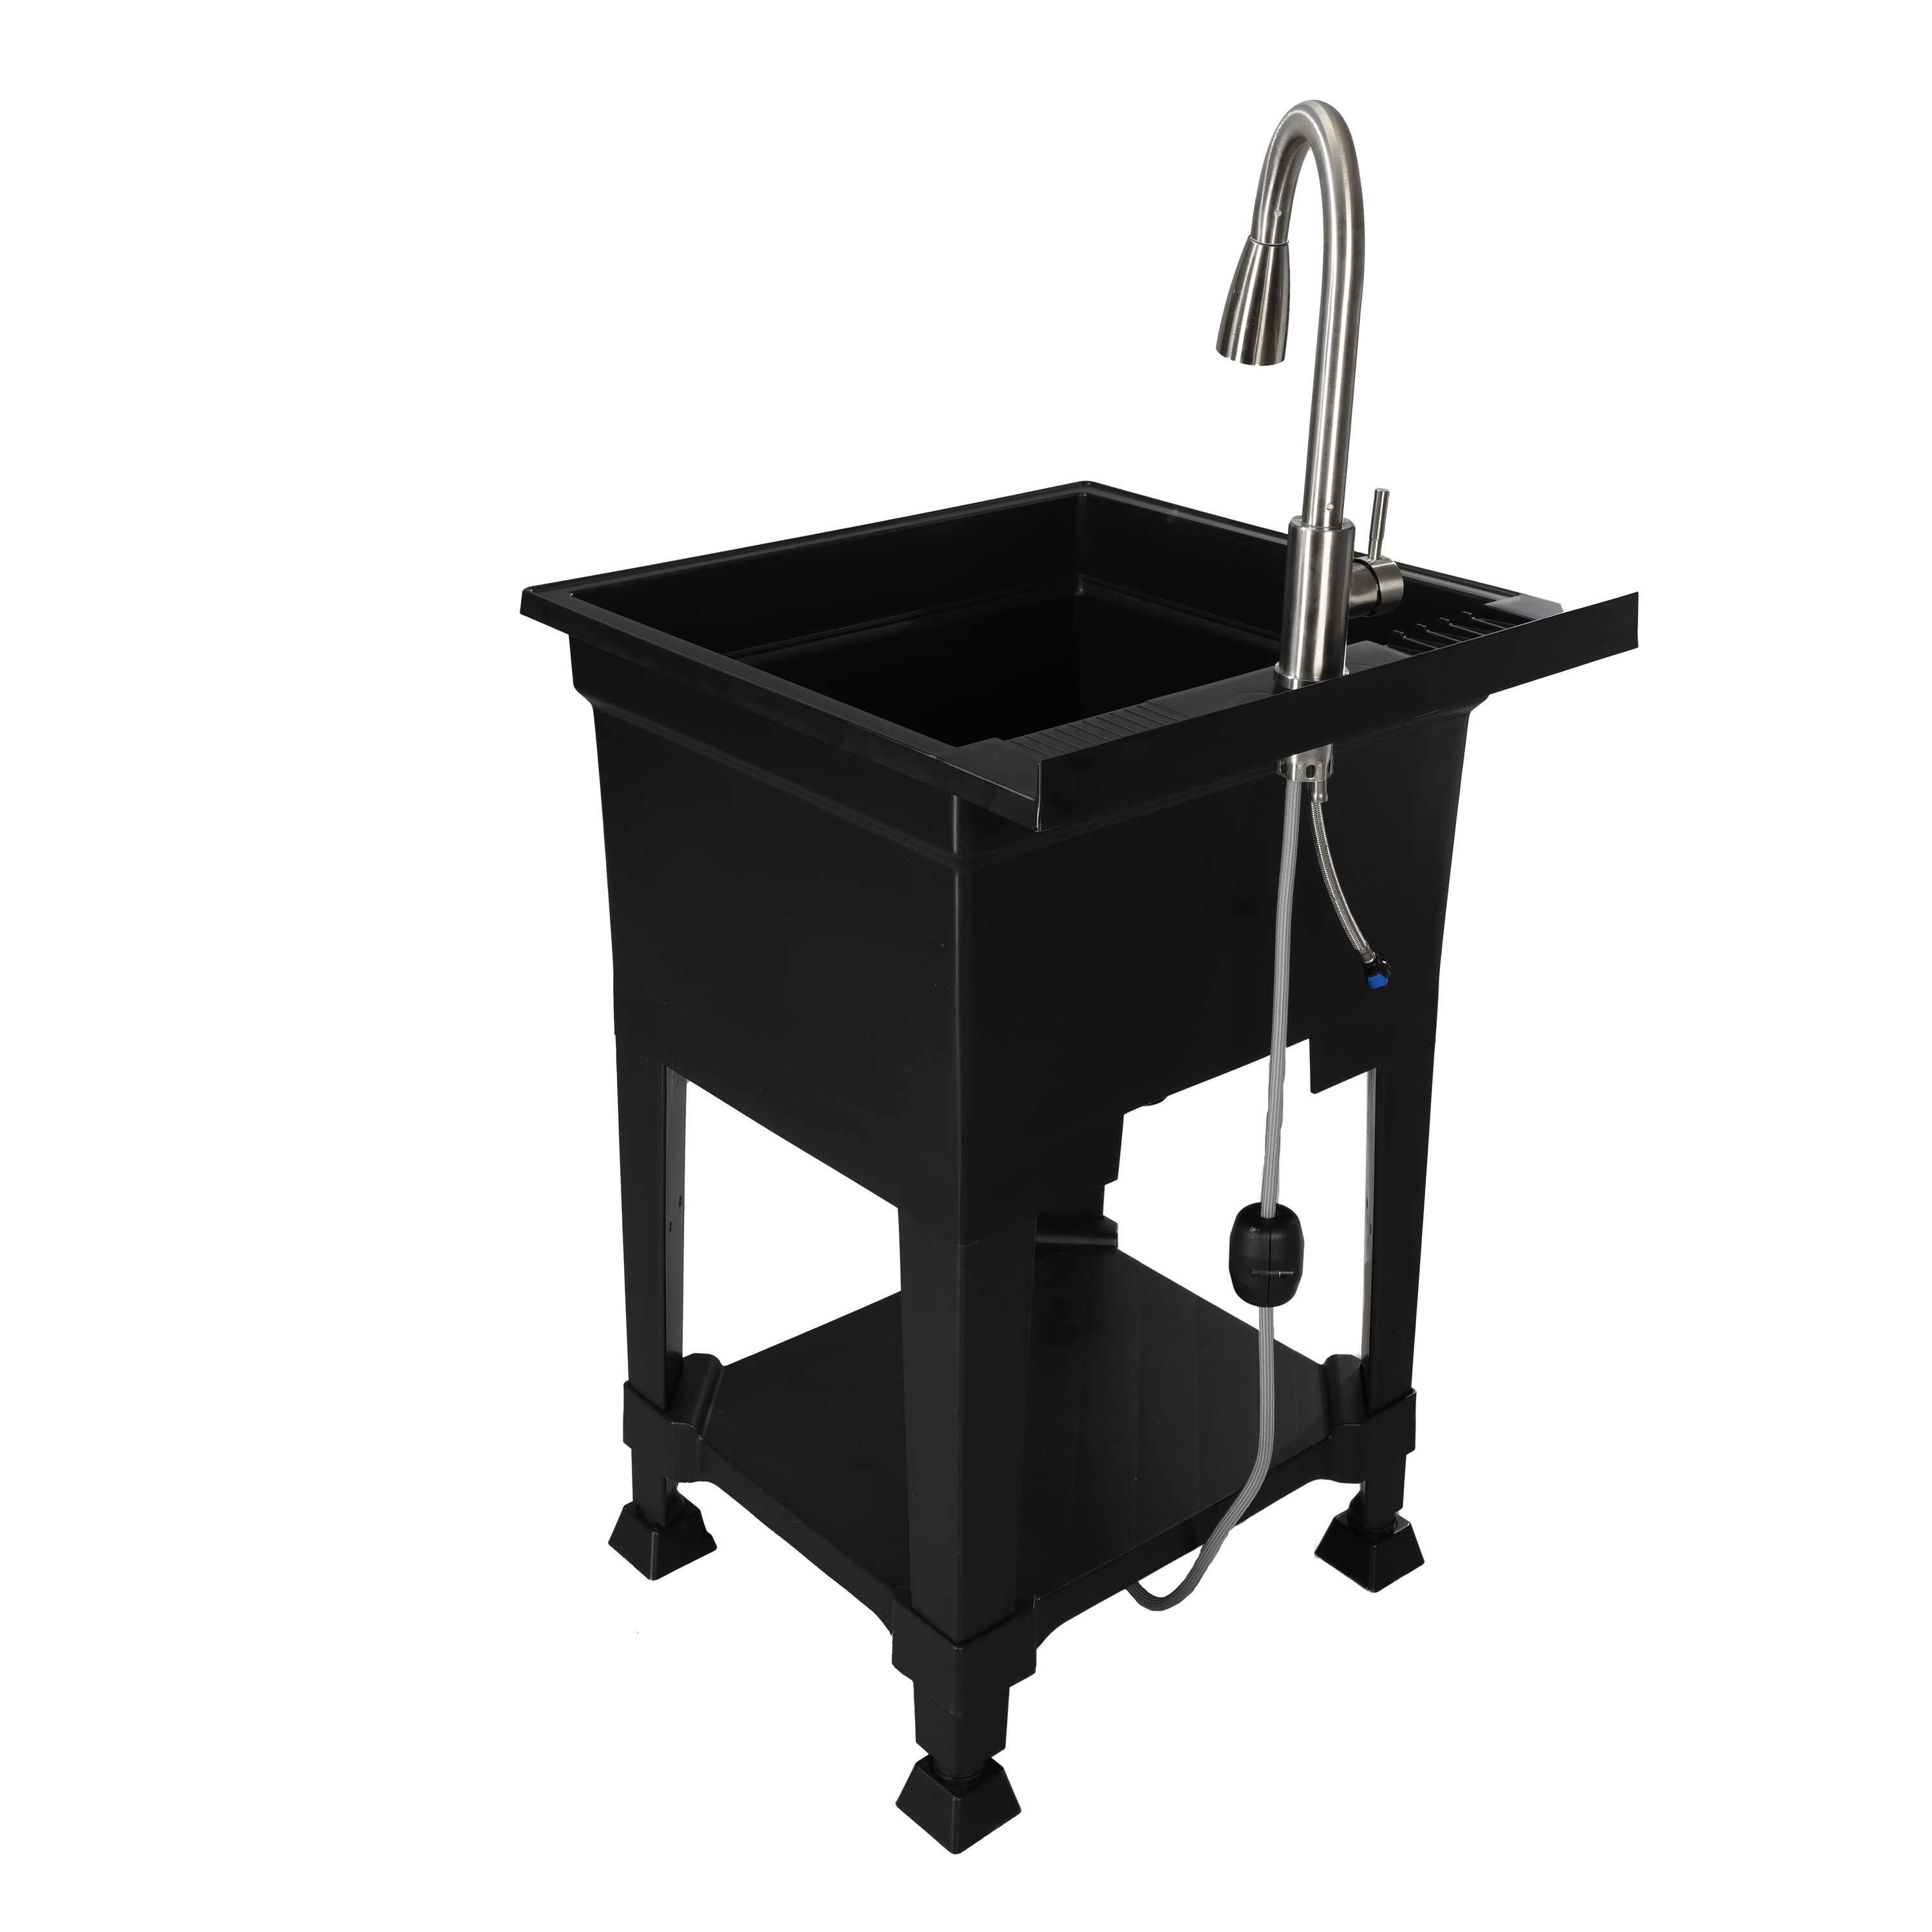 UTILITYSINKS USA-Made Plastic Freestanding 24 in x 24-Inch UtilityTub Heavy  Duty Compact Utility Sink Ideal for Workshop, Laundry Room, Garage